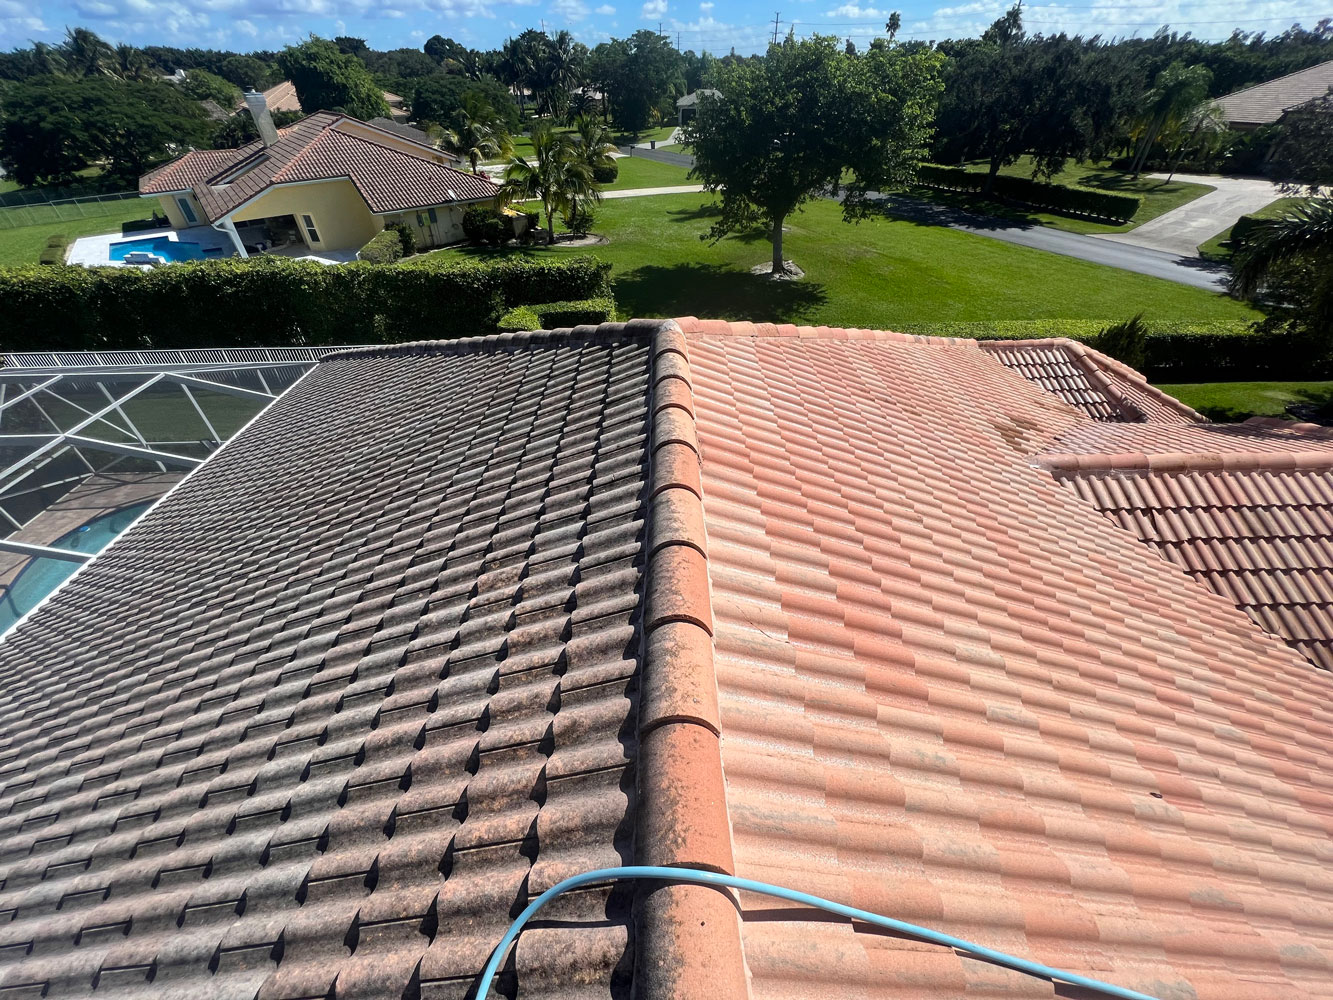 Our Multi Step Process To Make Your Roof Sparkle